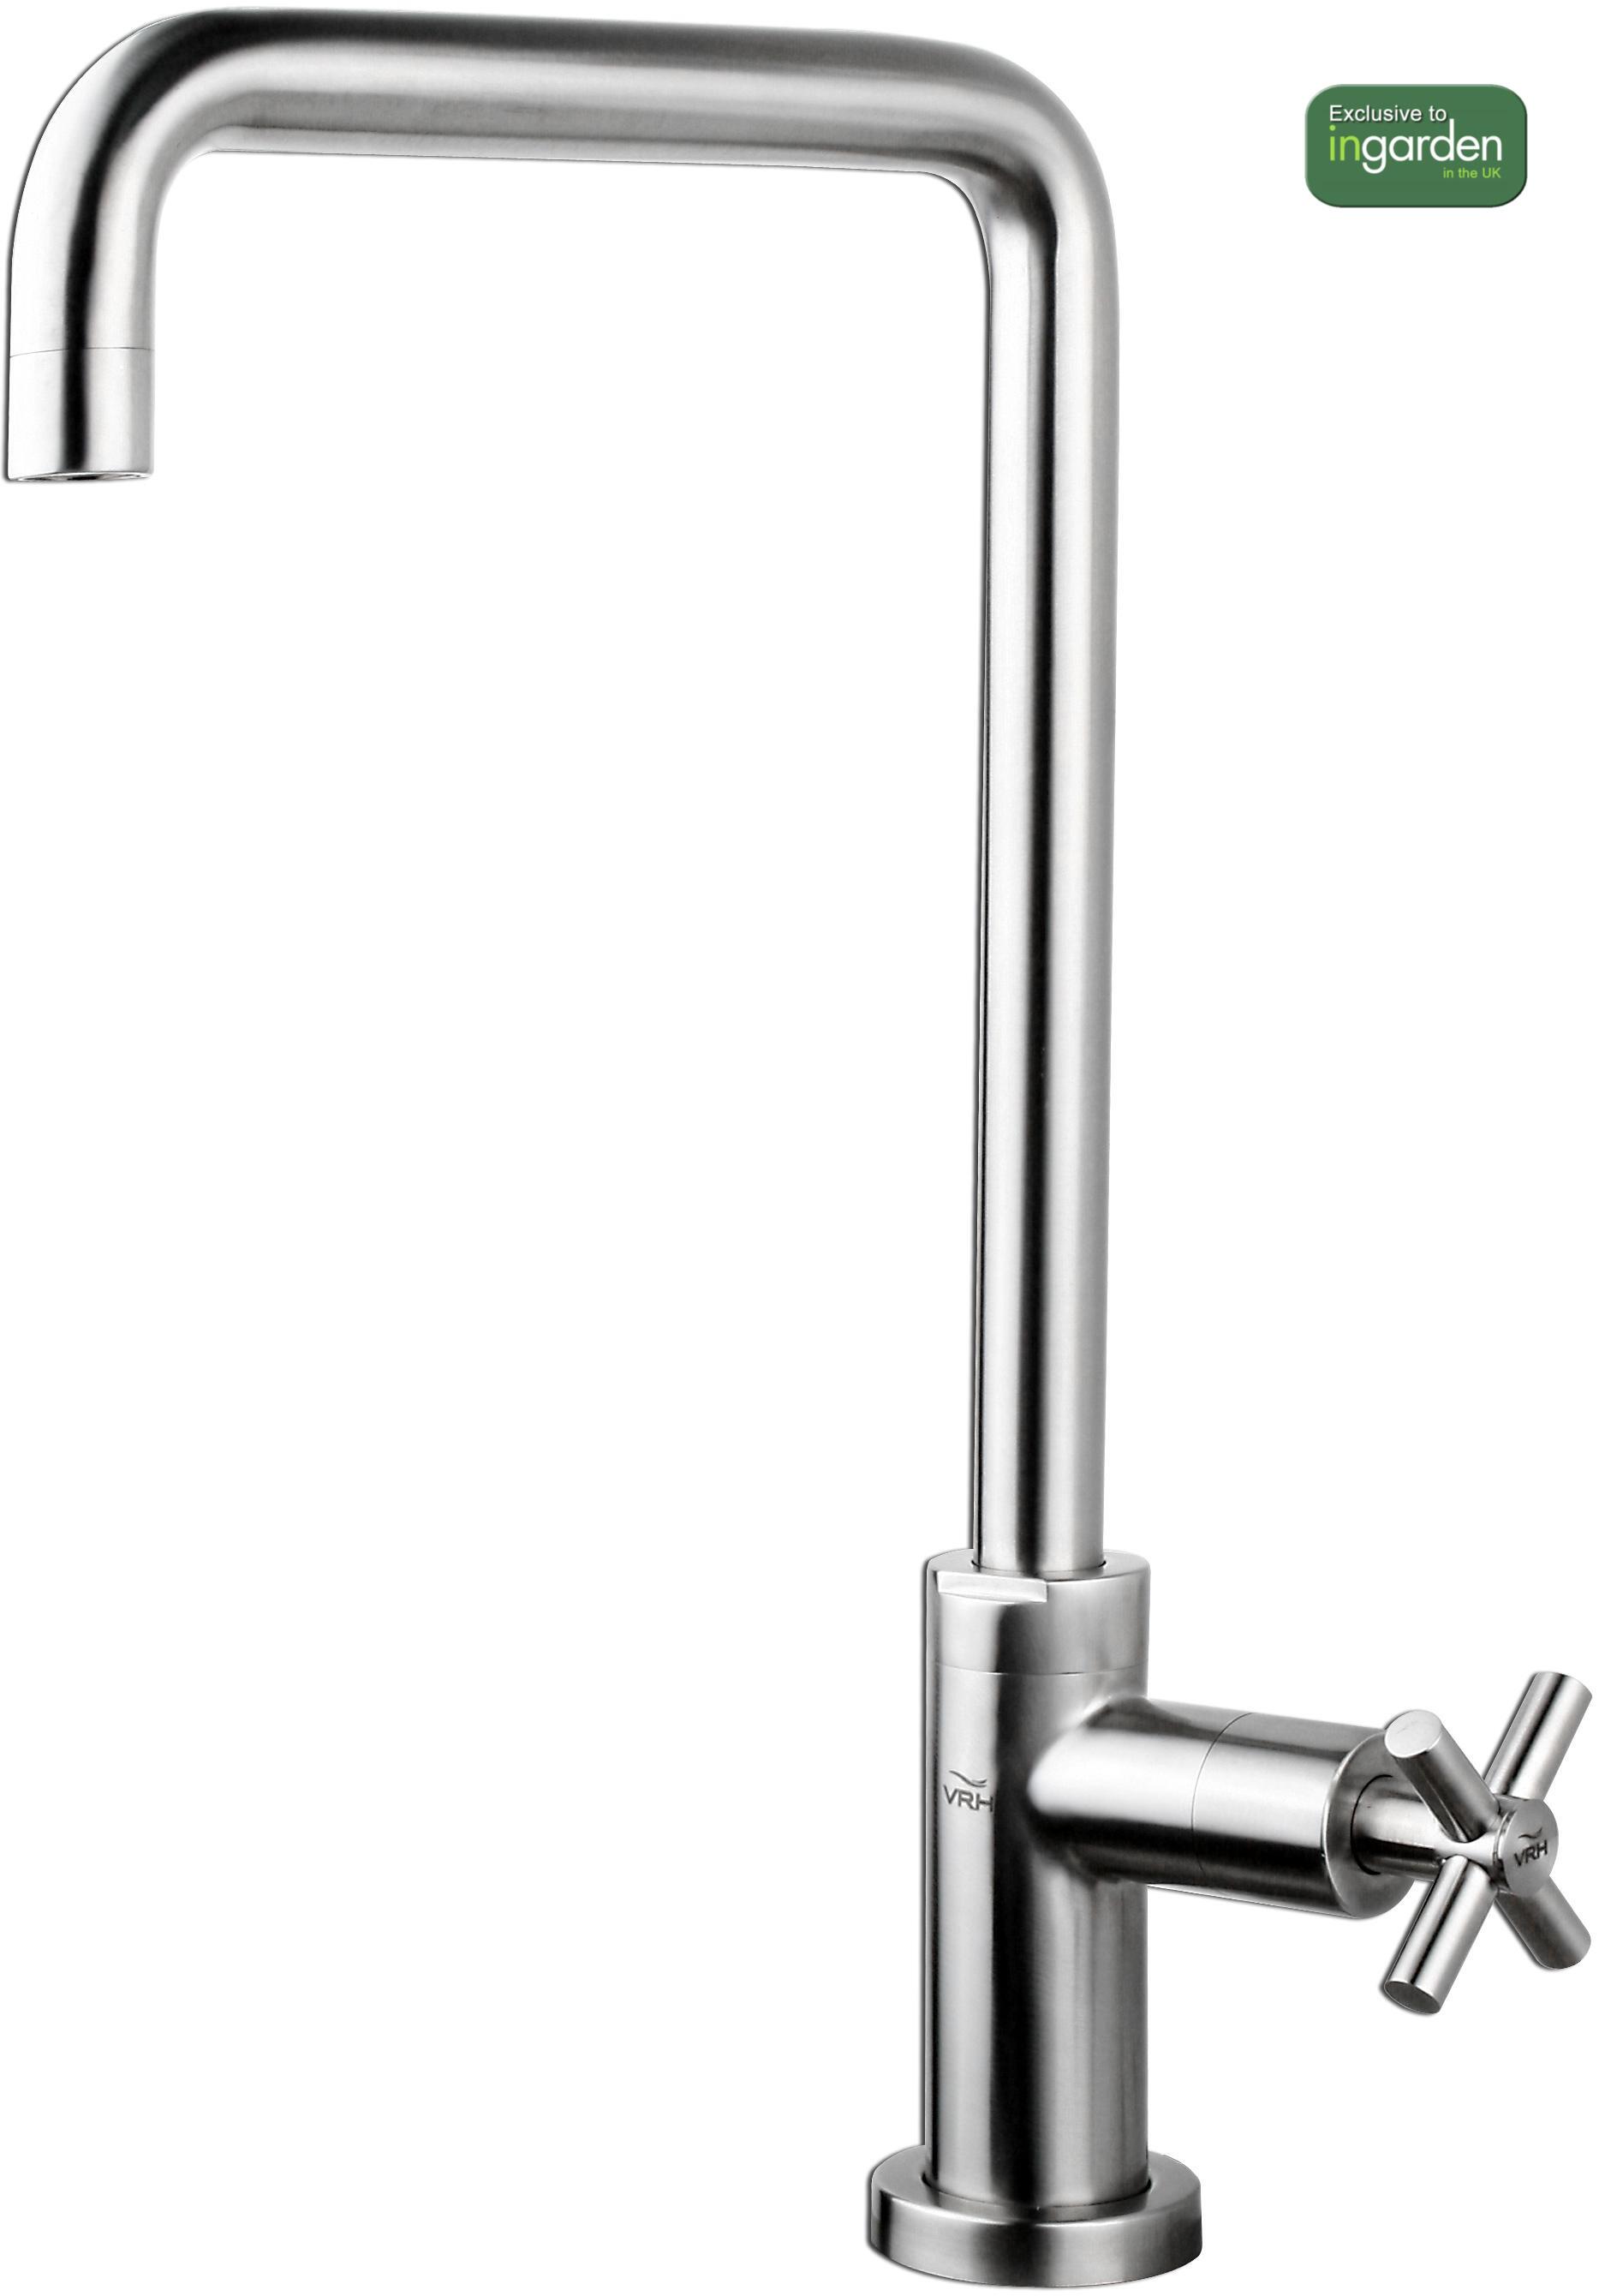 stainless_steel_outdoor_kitchen_tap_single_feed